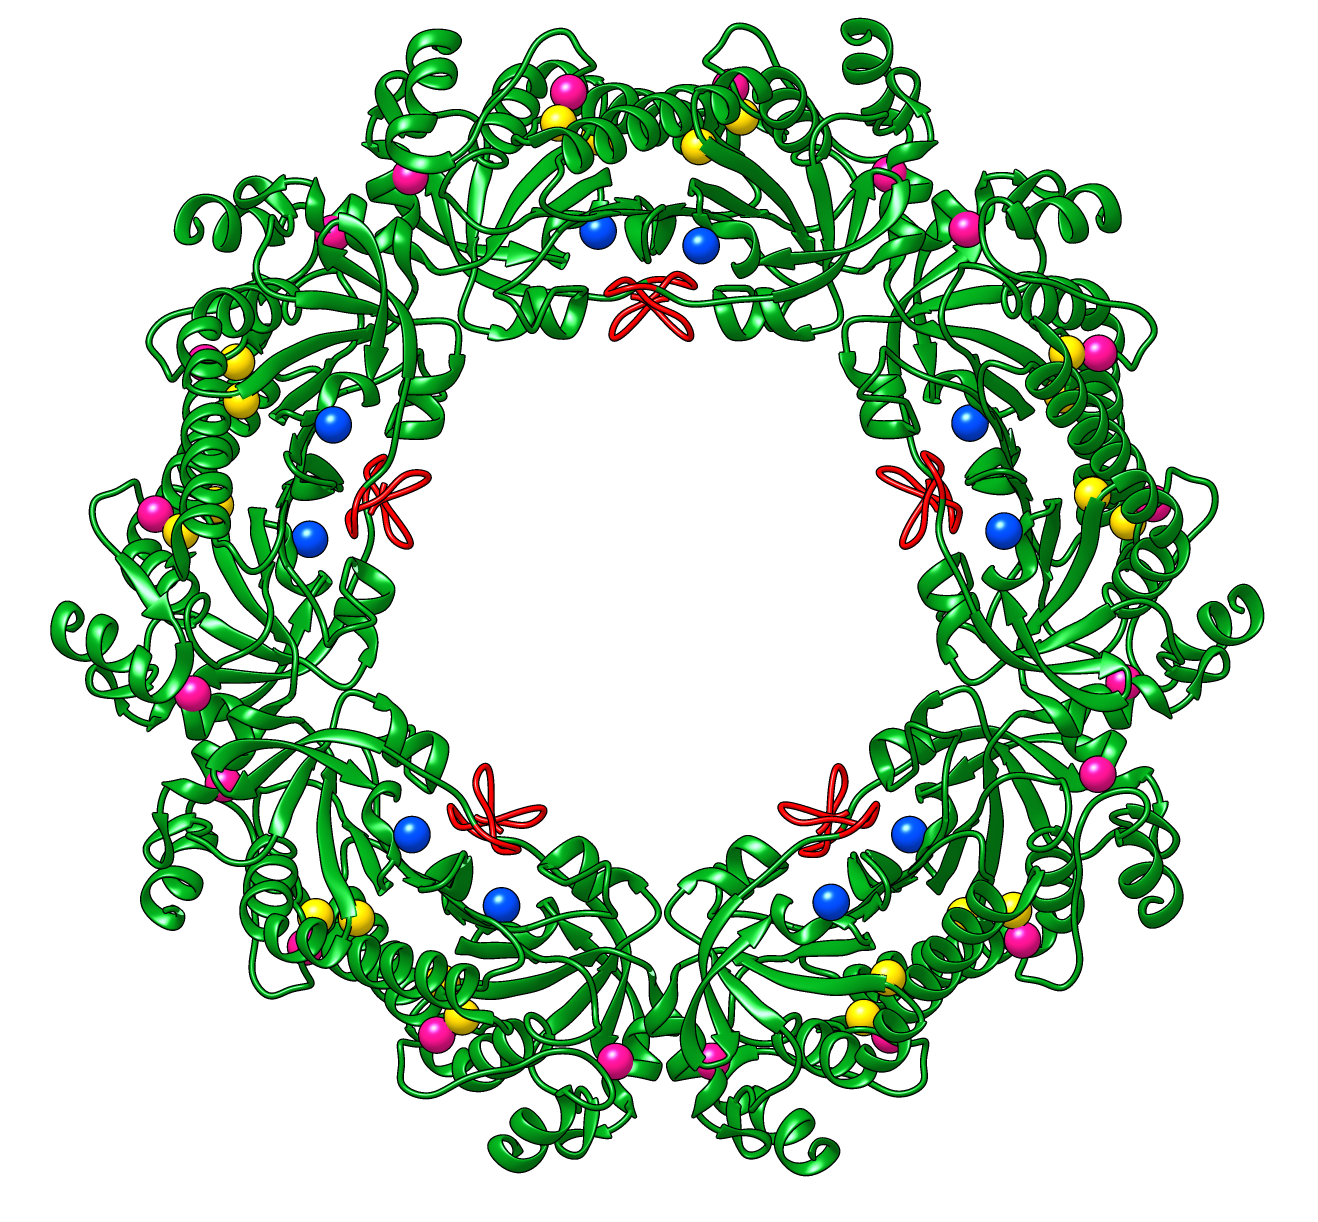 peroxiredoxin decamer styled as wreath